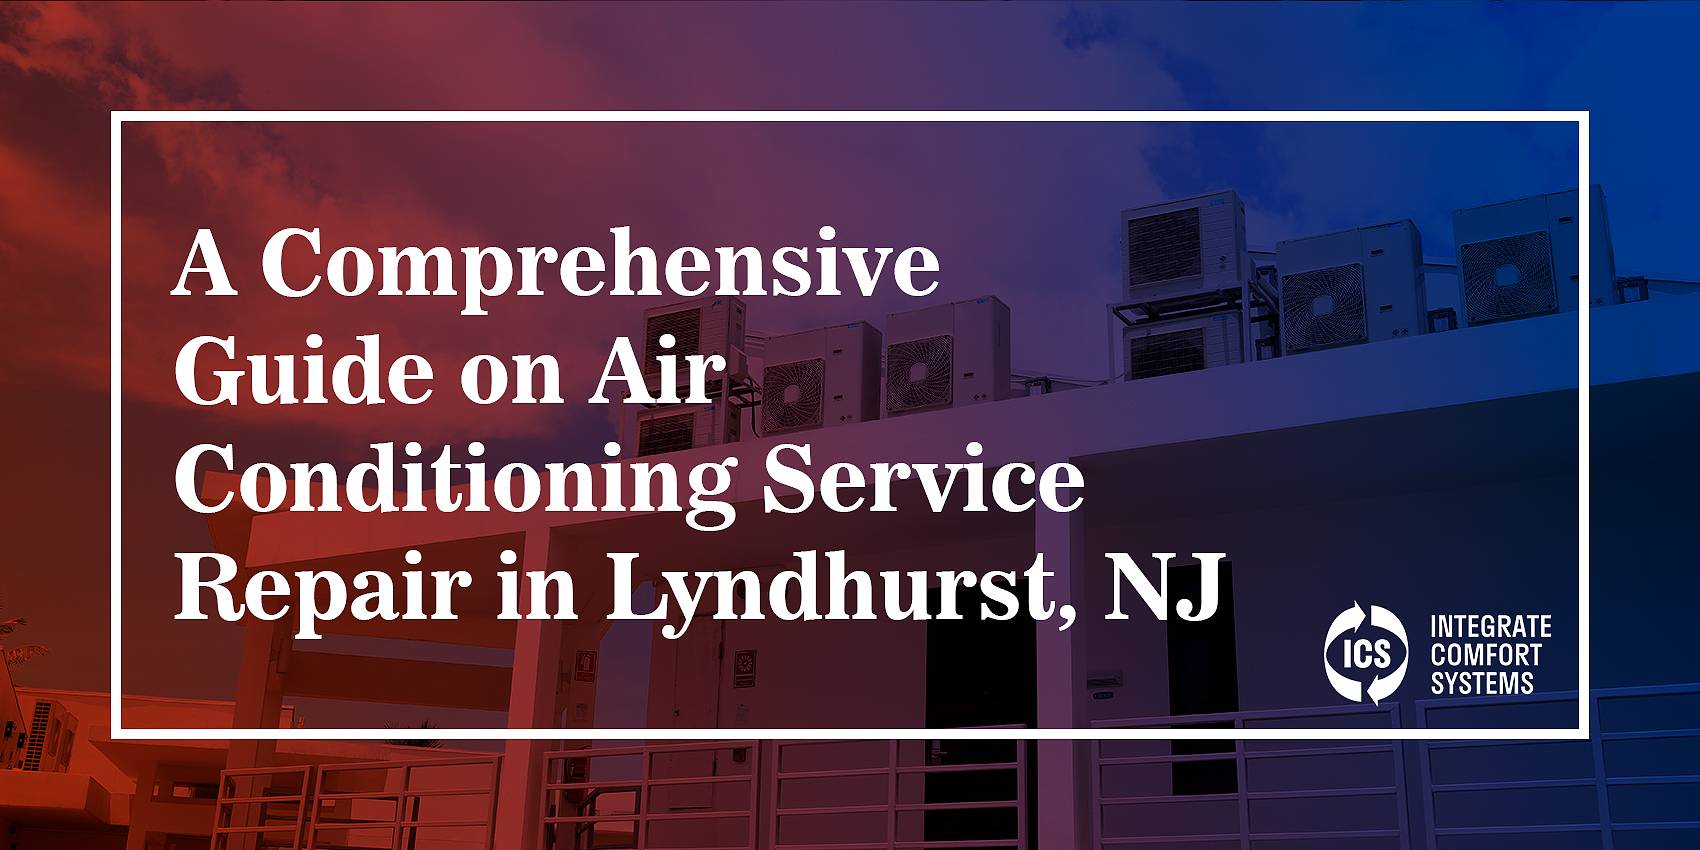 a comprehensive guide on air conditioning service repair in Lyndhurst, NJ